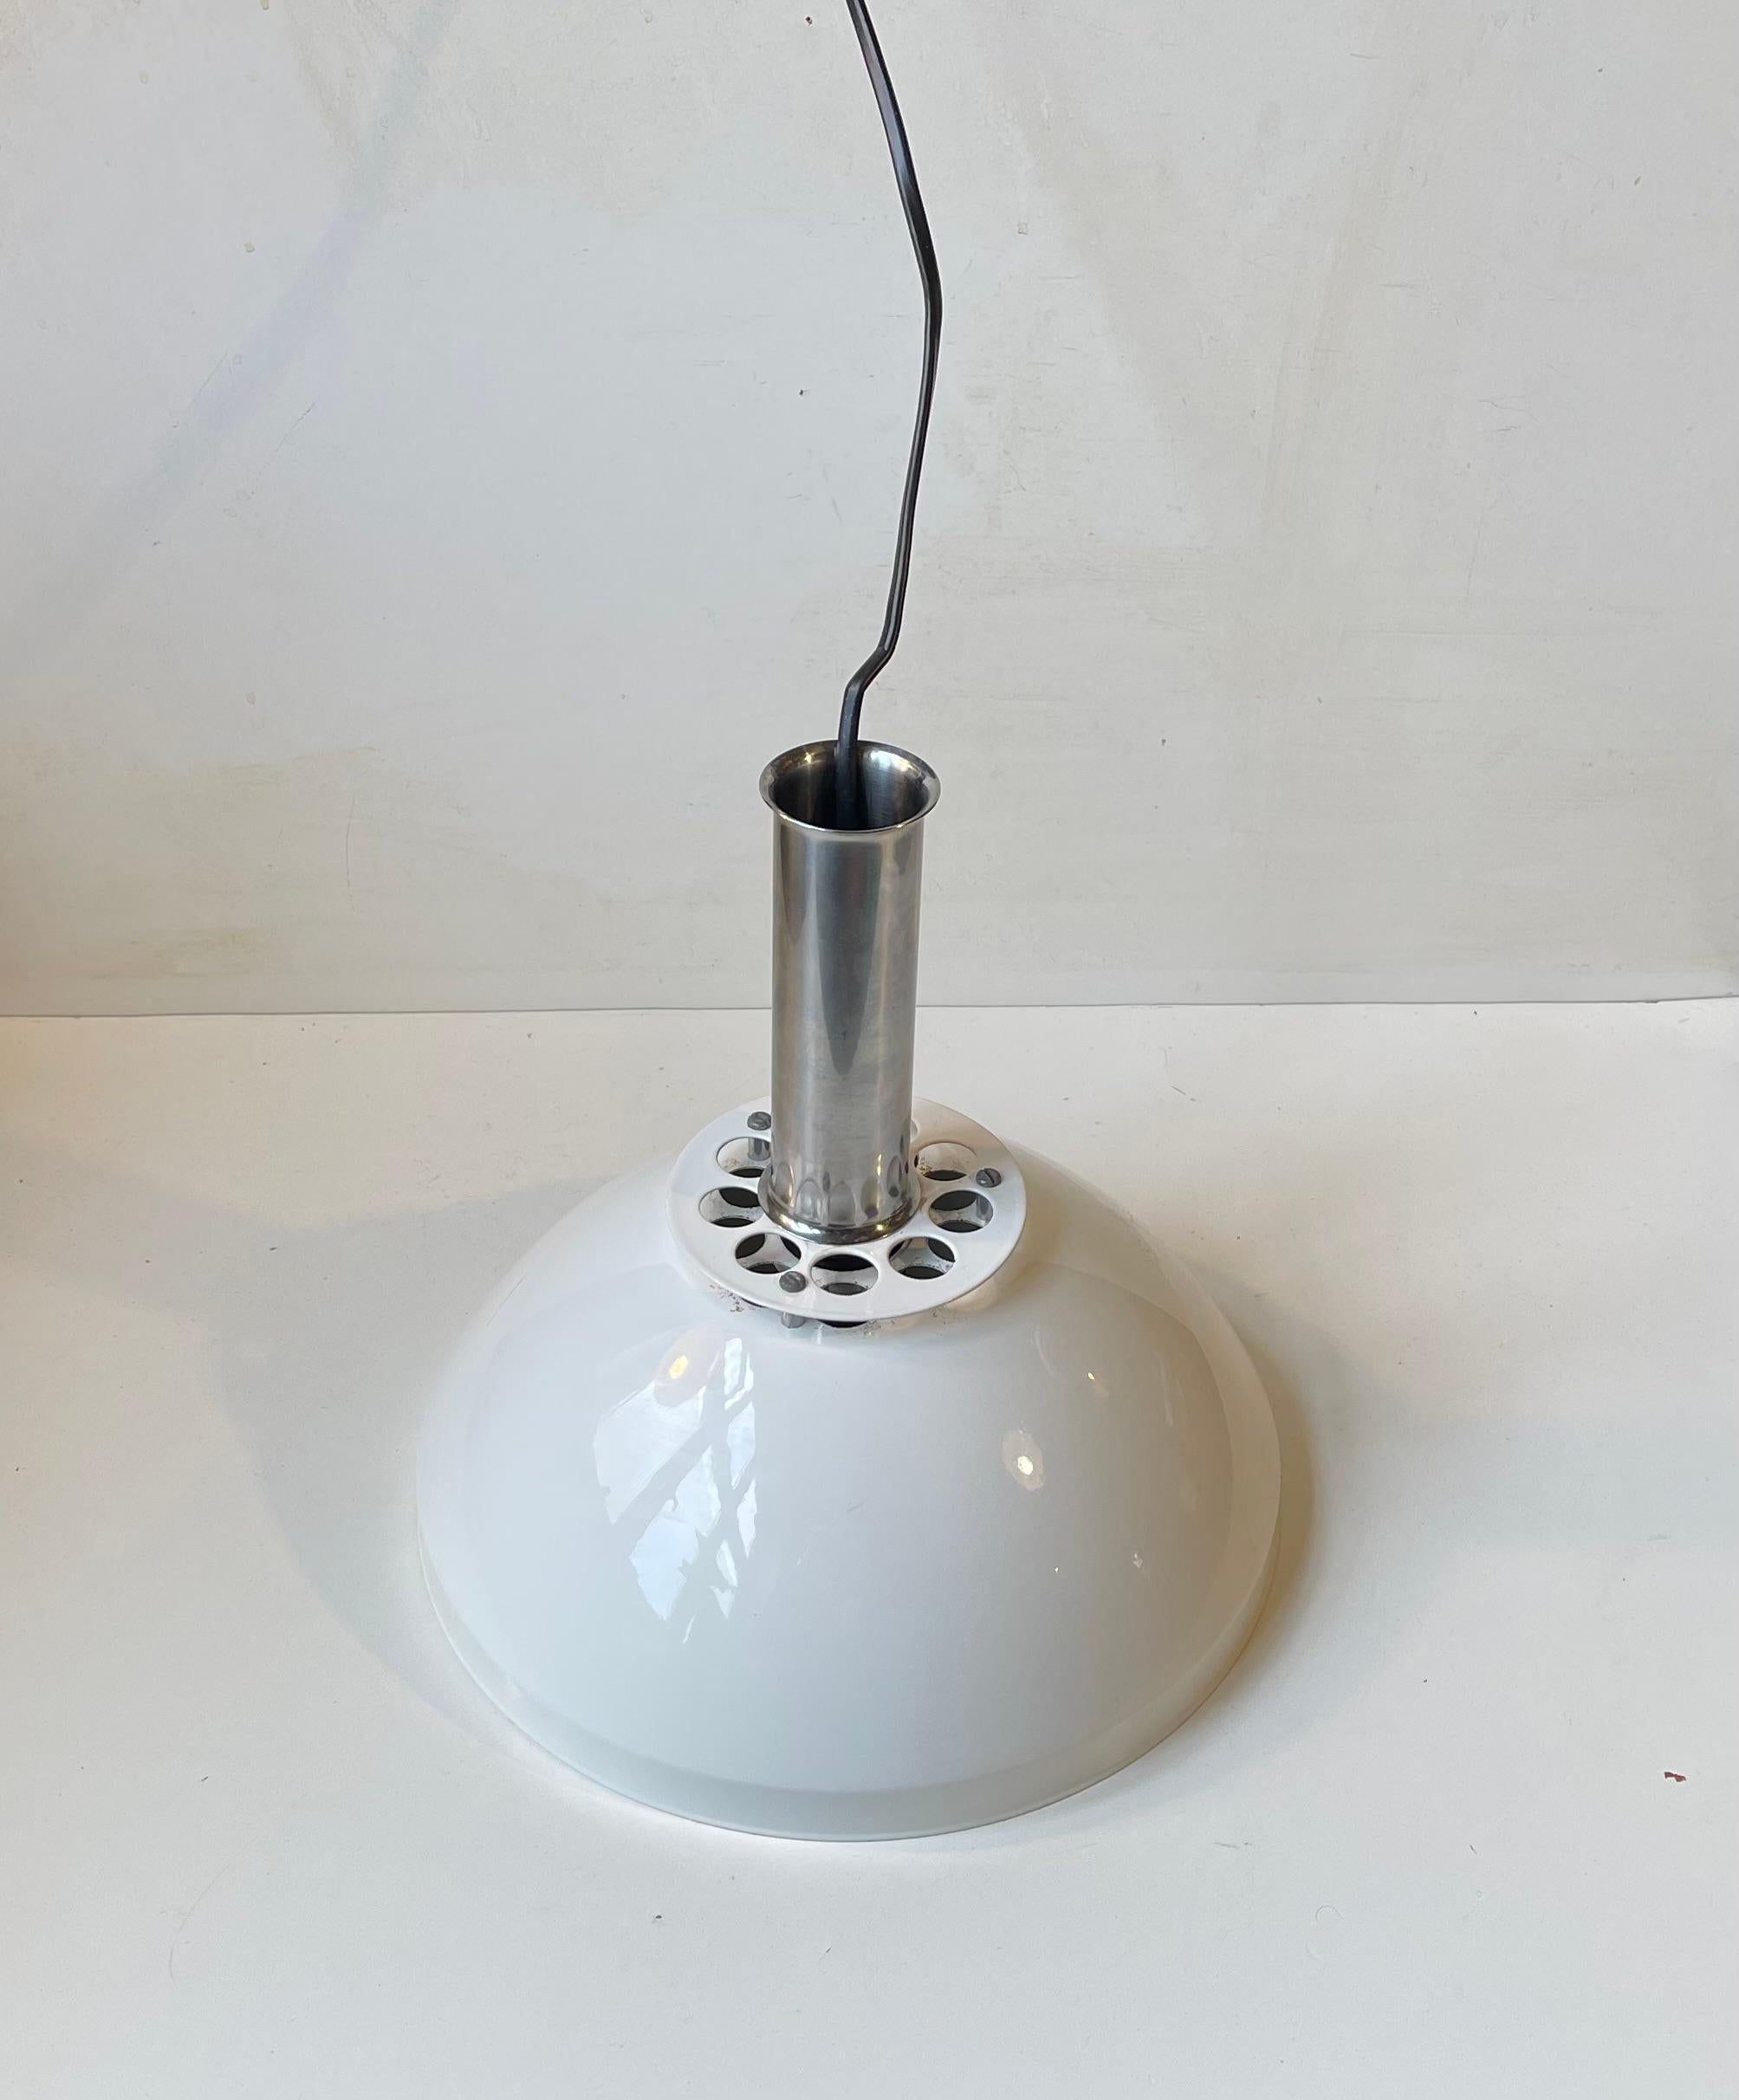 Italian Industrial Ceiling Lamp in White Enamel and Chrome Plating, 1970s For Sale 3